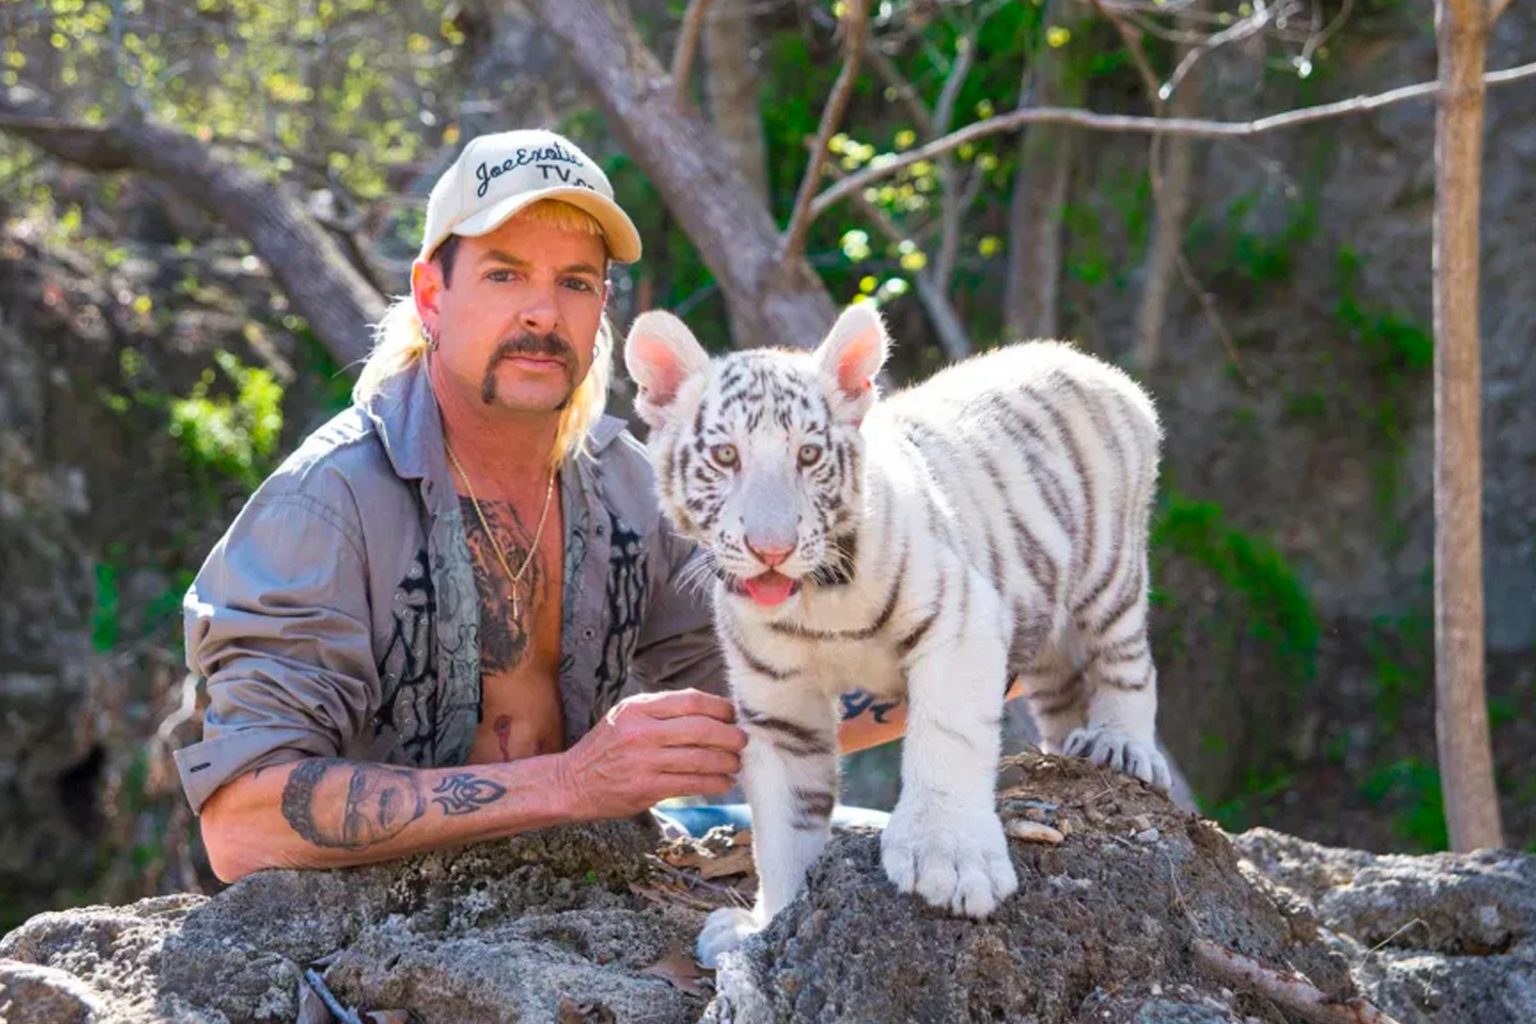 With the world around us going crazy, Netflix really lucked out releasing 'Tiger King' during quarantine. Here's what we know about the new episode.